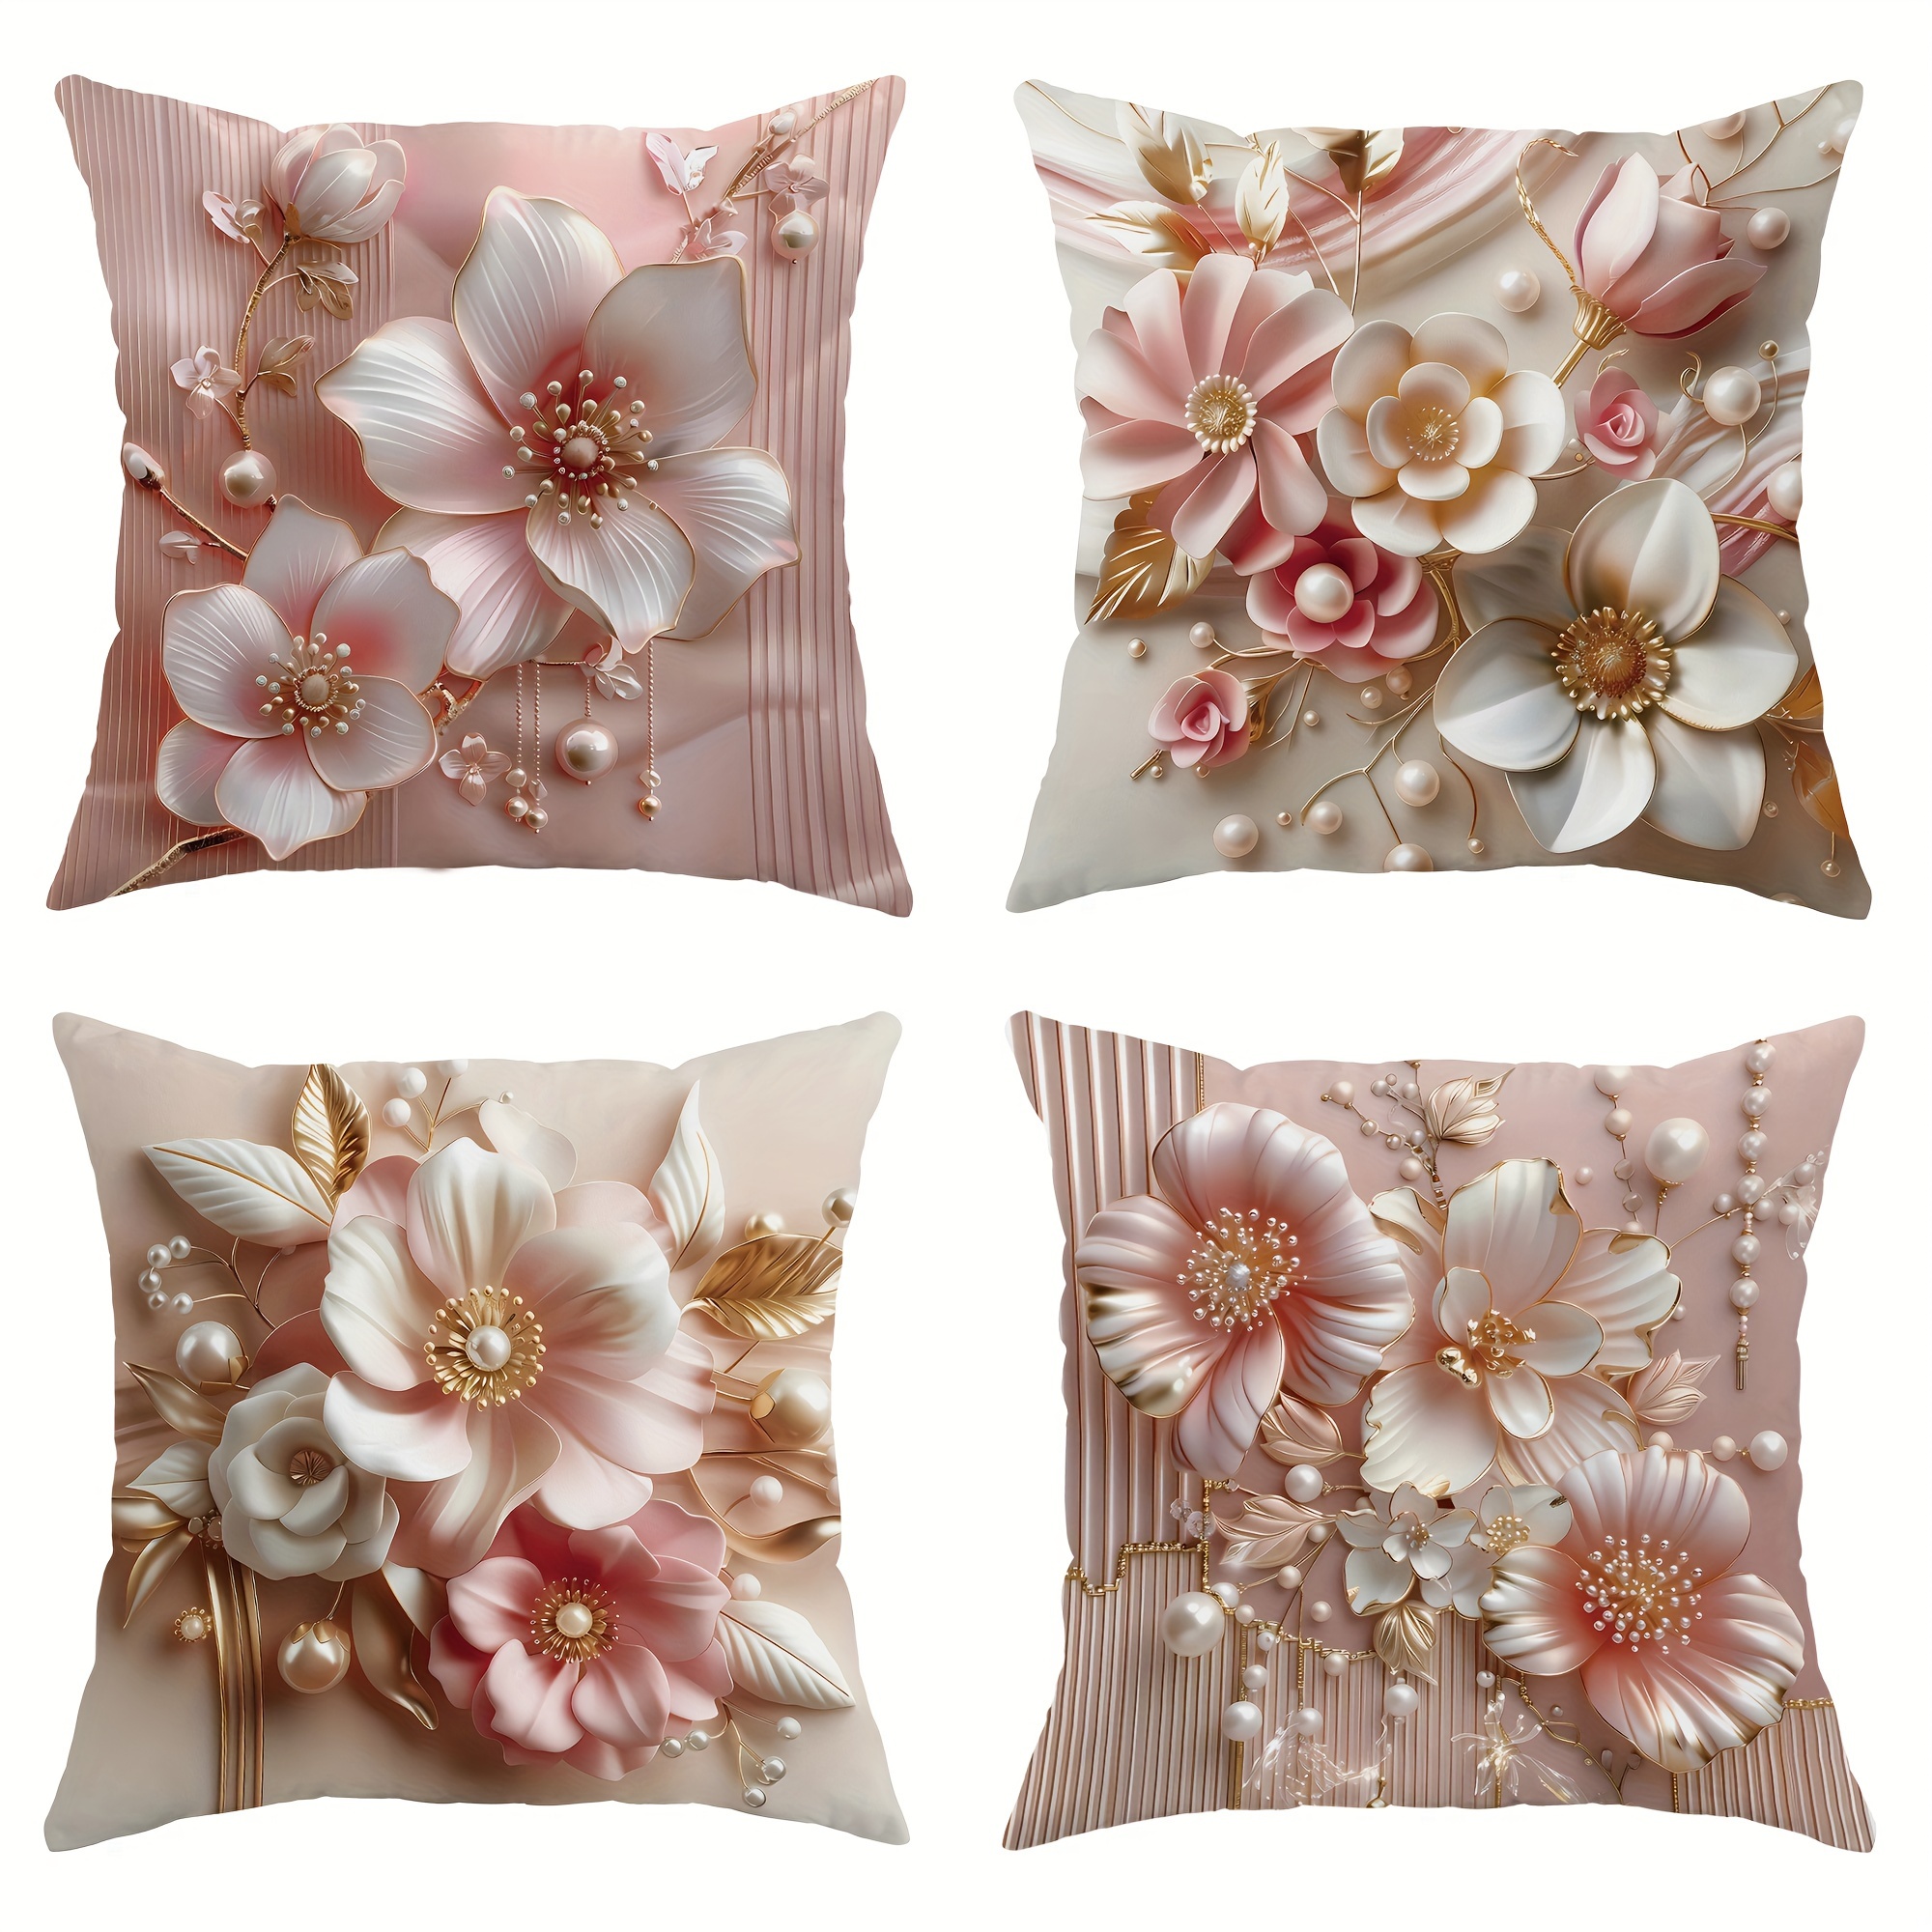 

4-piece Set Luxury Velvet Throw Pillow Covers - Floral Pearl & Golden Design, 18x18 Inches - Perfect For Living Room & Bedroom Decor, Machine Washable With Zip Closure